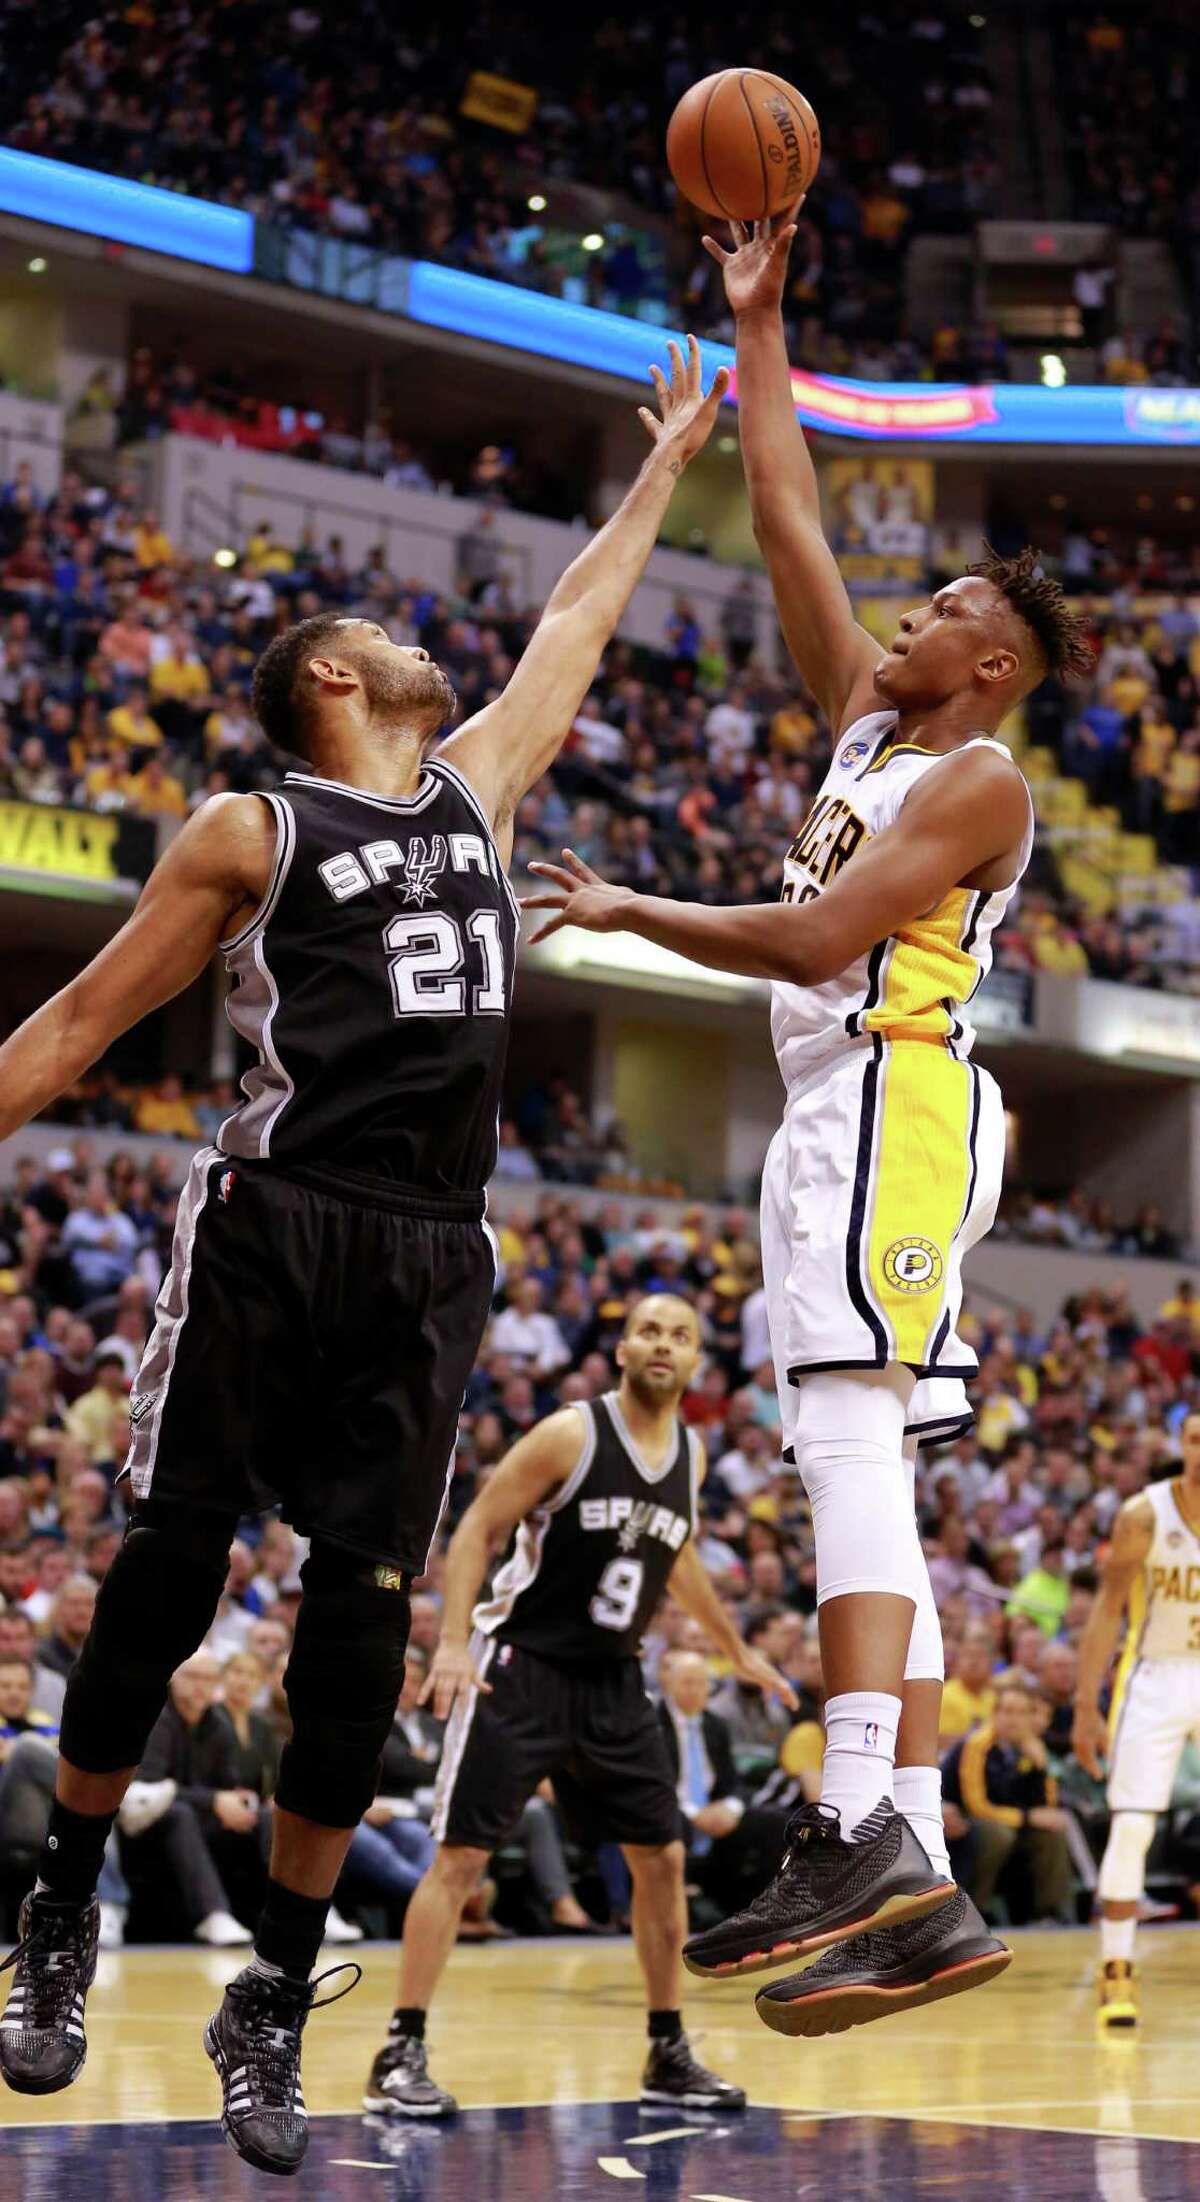 Indiana Pacers forward Myles Turner, right, shoots the basketball over San Antonio Spurs forward Tim Duncan (21) in the first half of an NBA basketball game, Monday, March 7, 2016, in Indianapolis. (AP Photo/R Brent Smith)